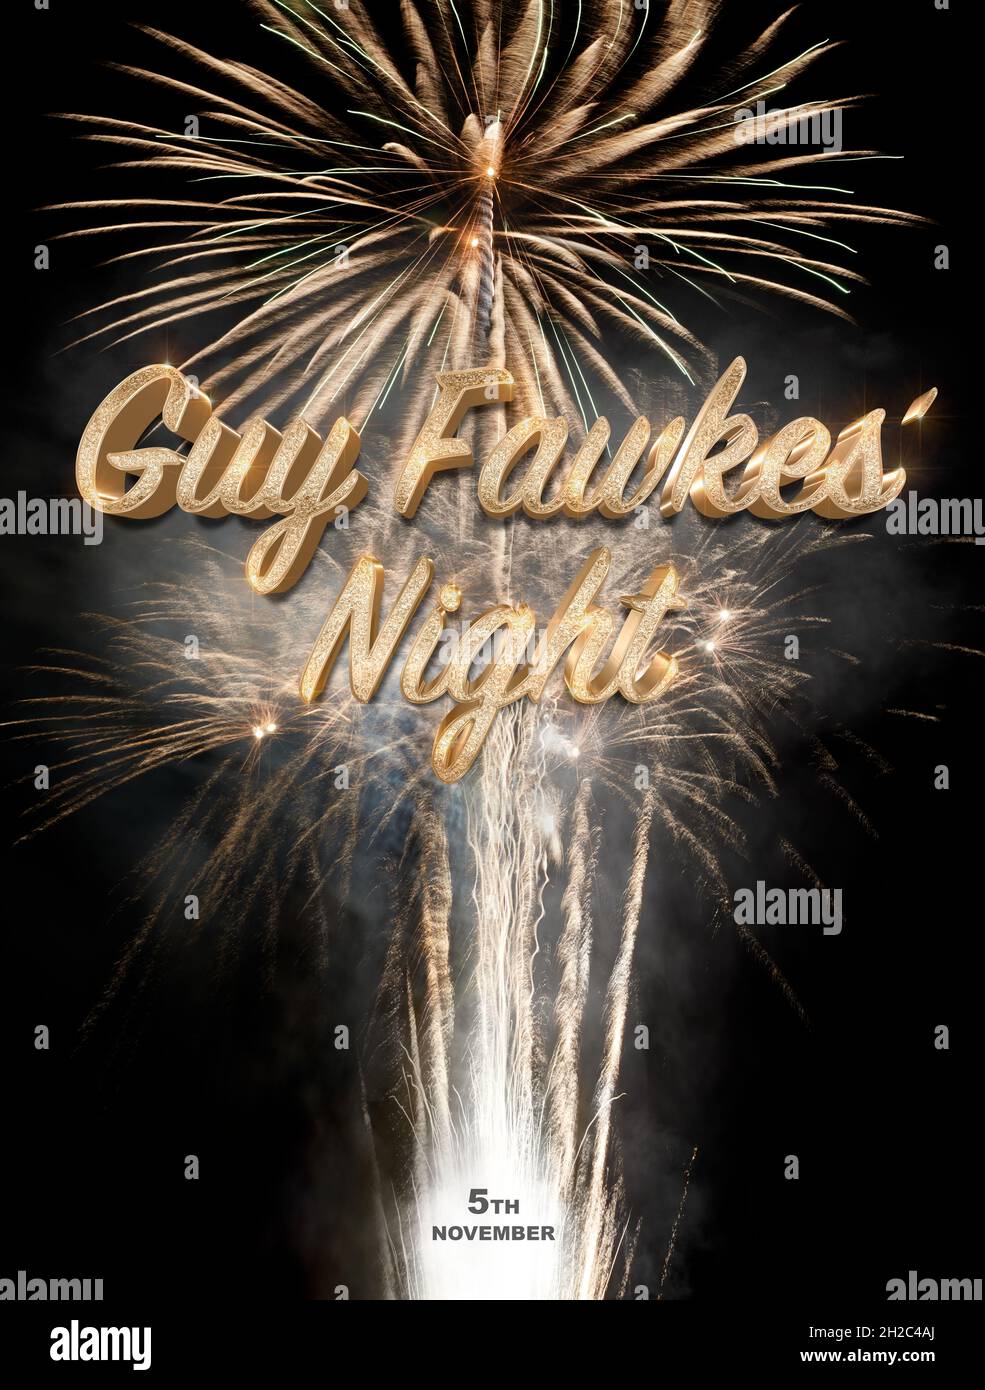 Guy Fawkes Night poster design with glowing golden text and fireworks with fiery bursting rockets on black night sky Stock Photo